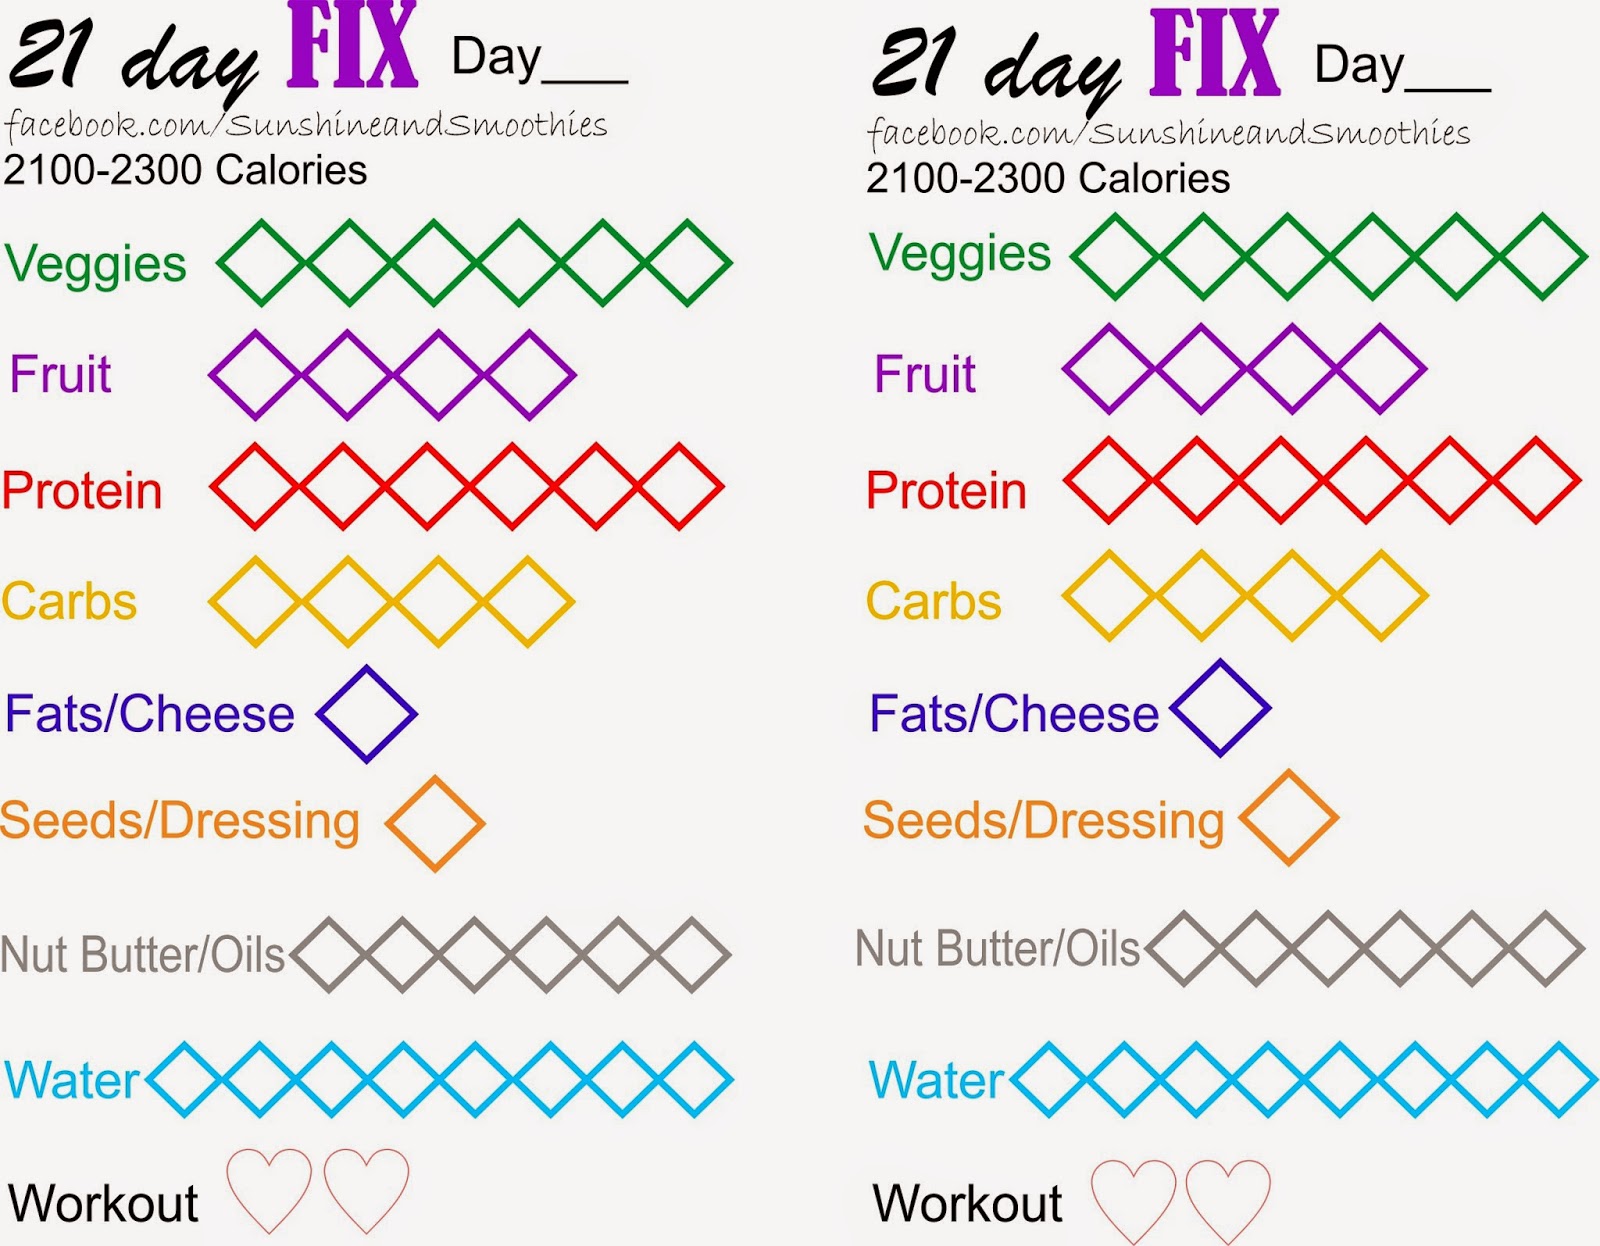 sunshine-and-smoothies-fitness-21-day-fix-tally-sheets-all-calorie-ranges